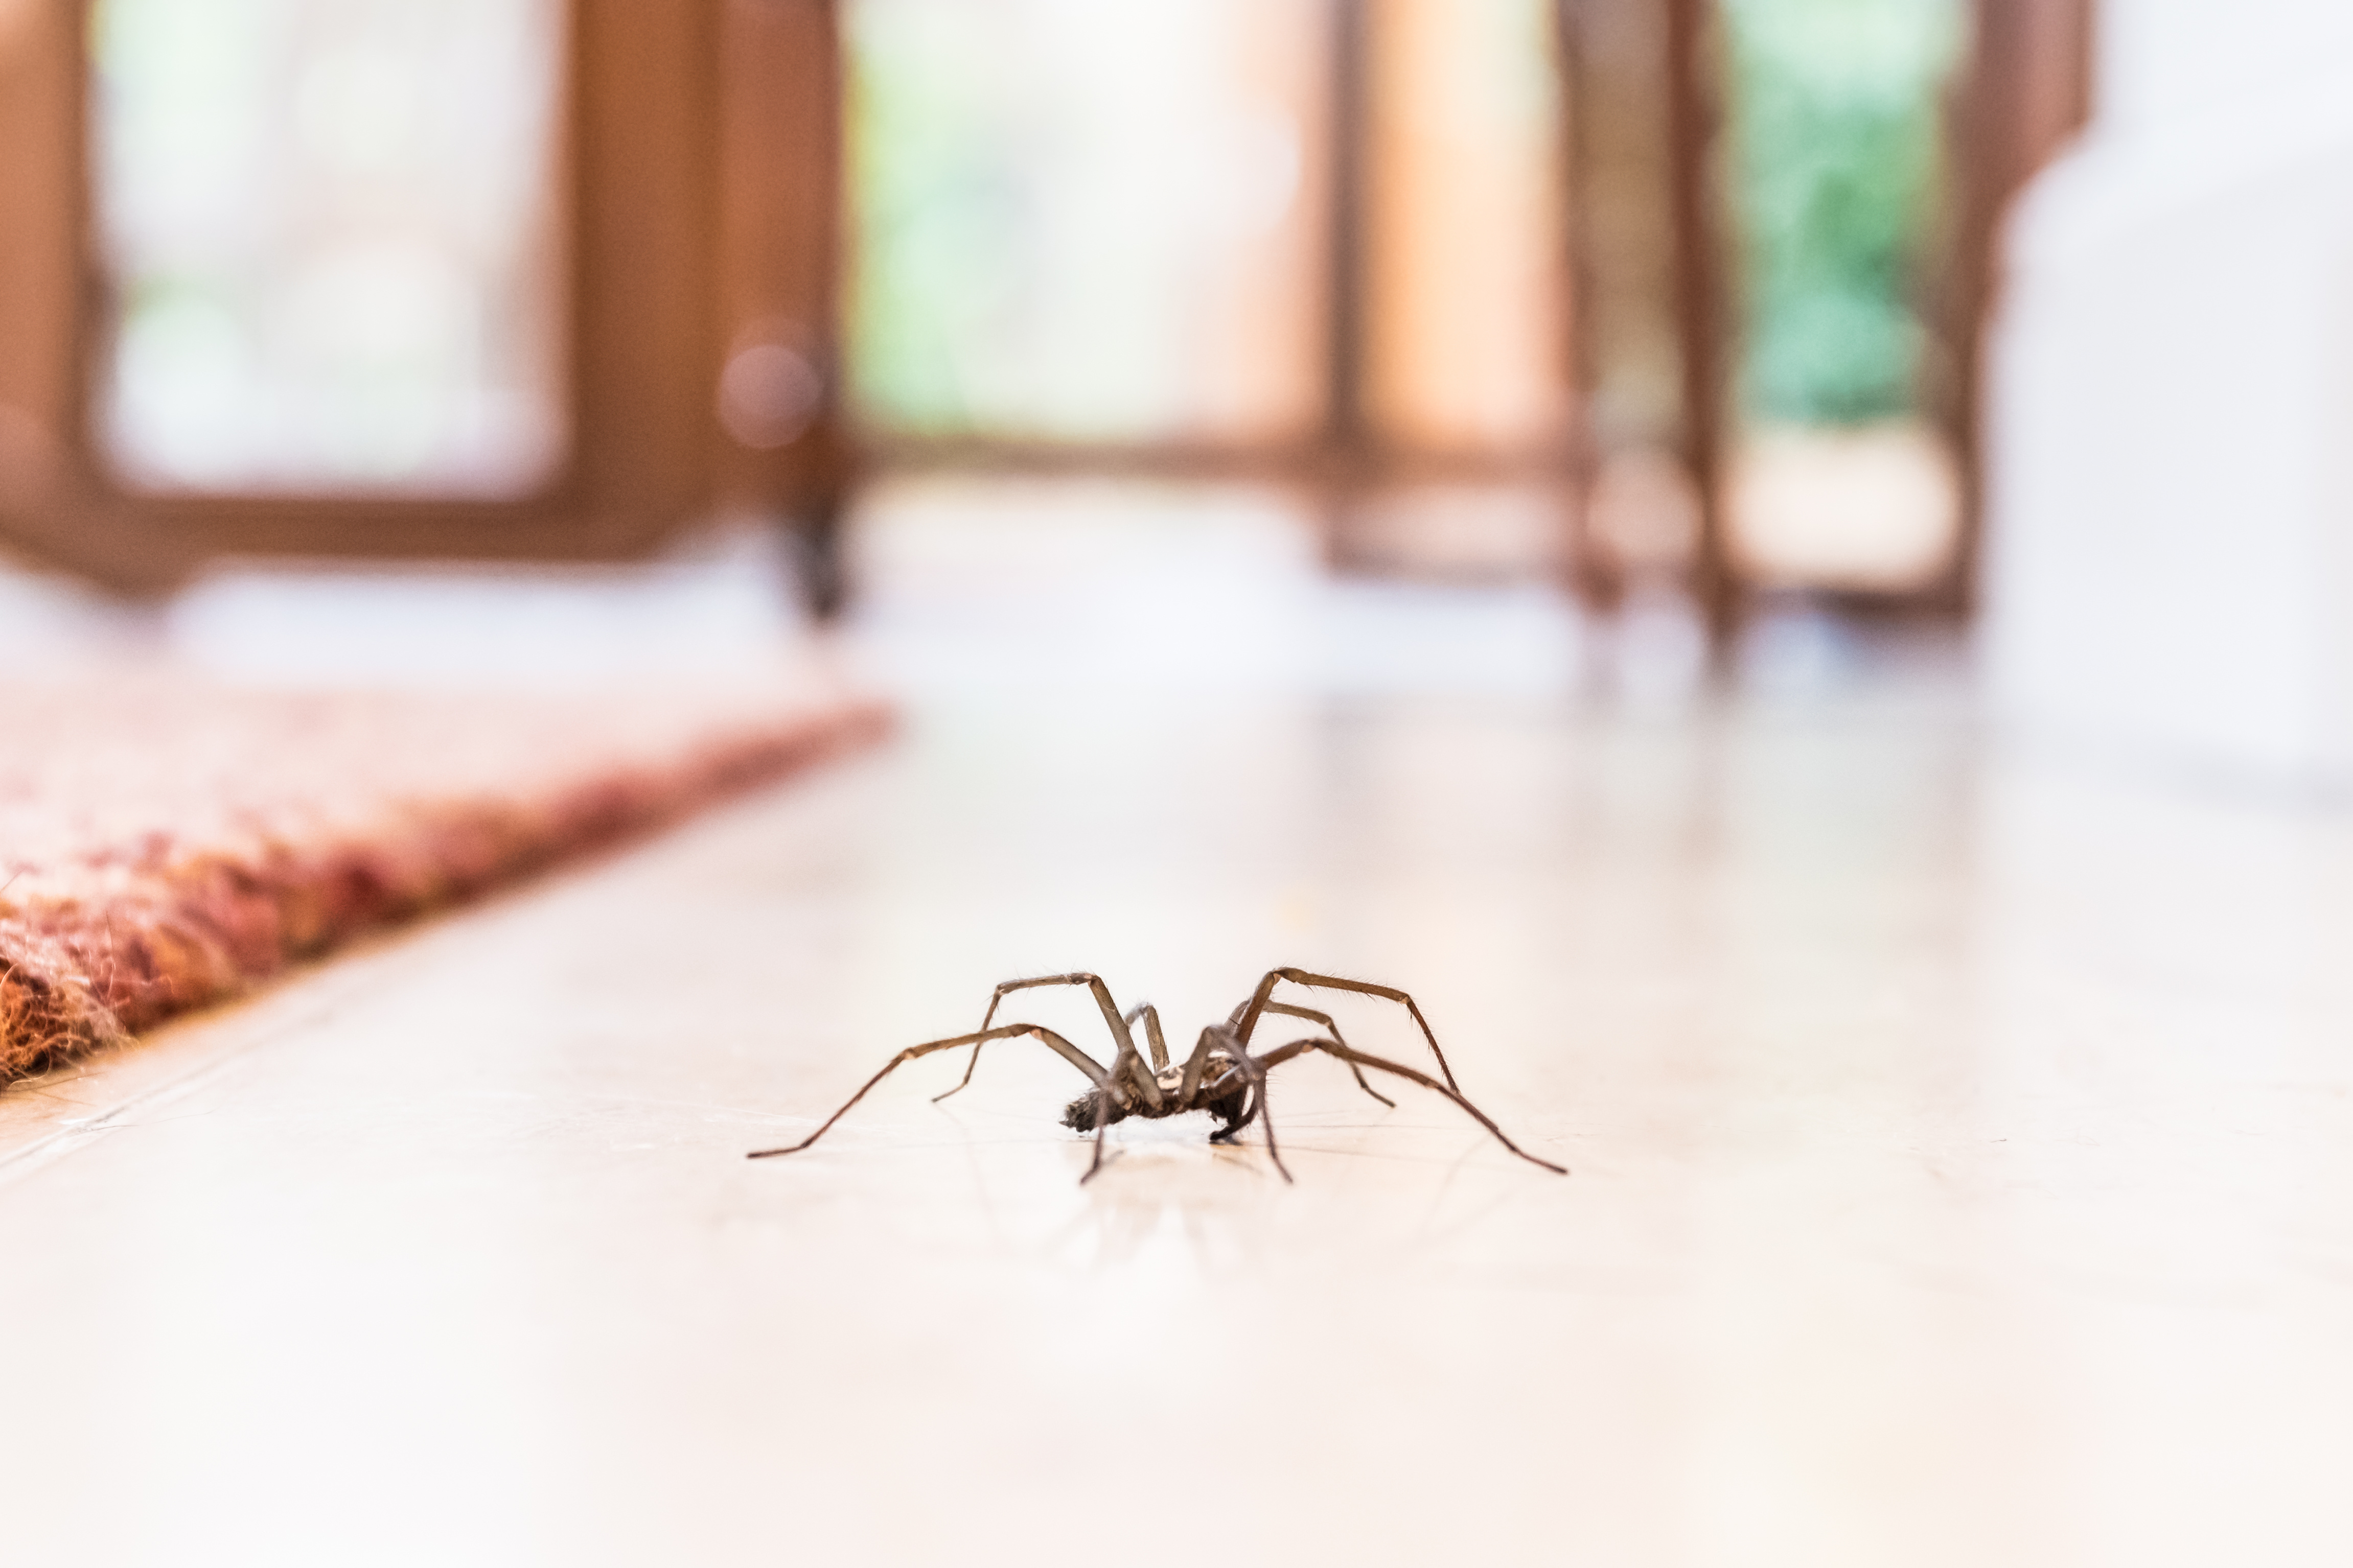 A spider scuttling across a hardwood floor - contact GGA Pest Management Temple today for professional spider removal.